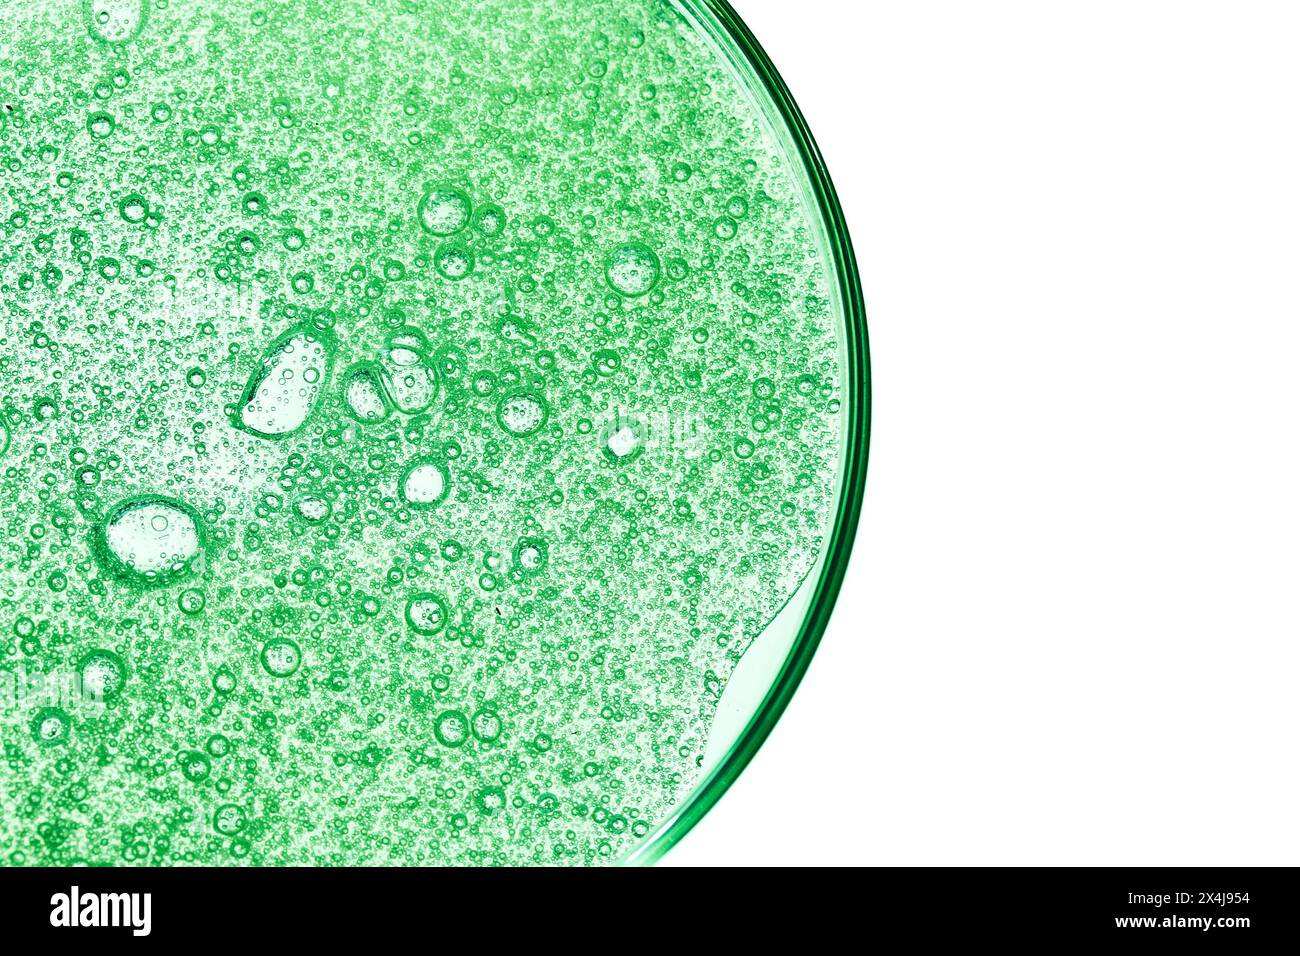 Abstract cosmetic laboratory. A fresh gel on a glass petri. Stock Photo